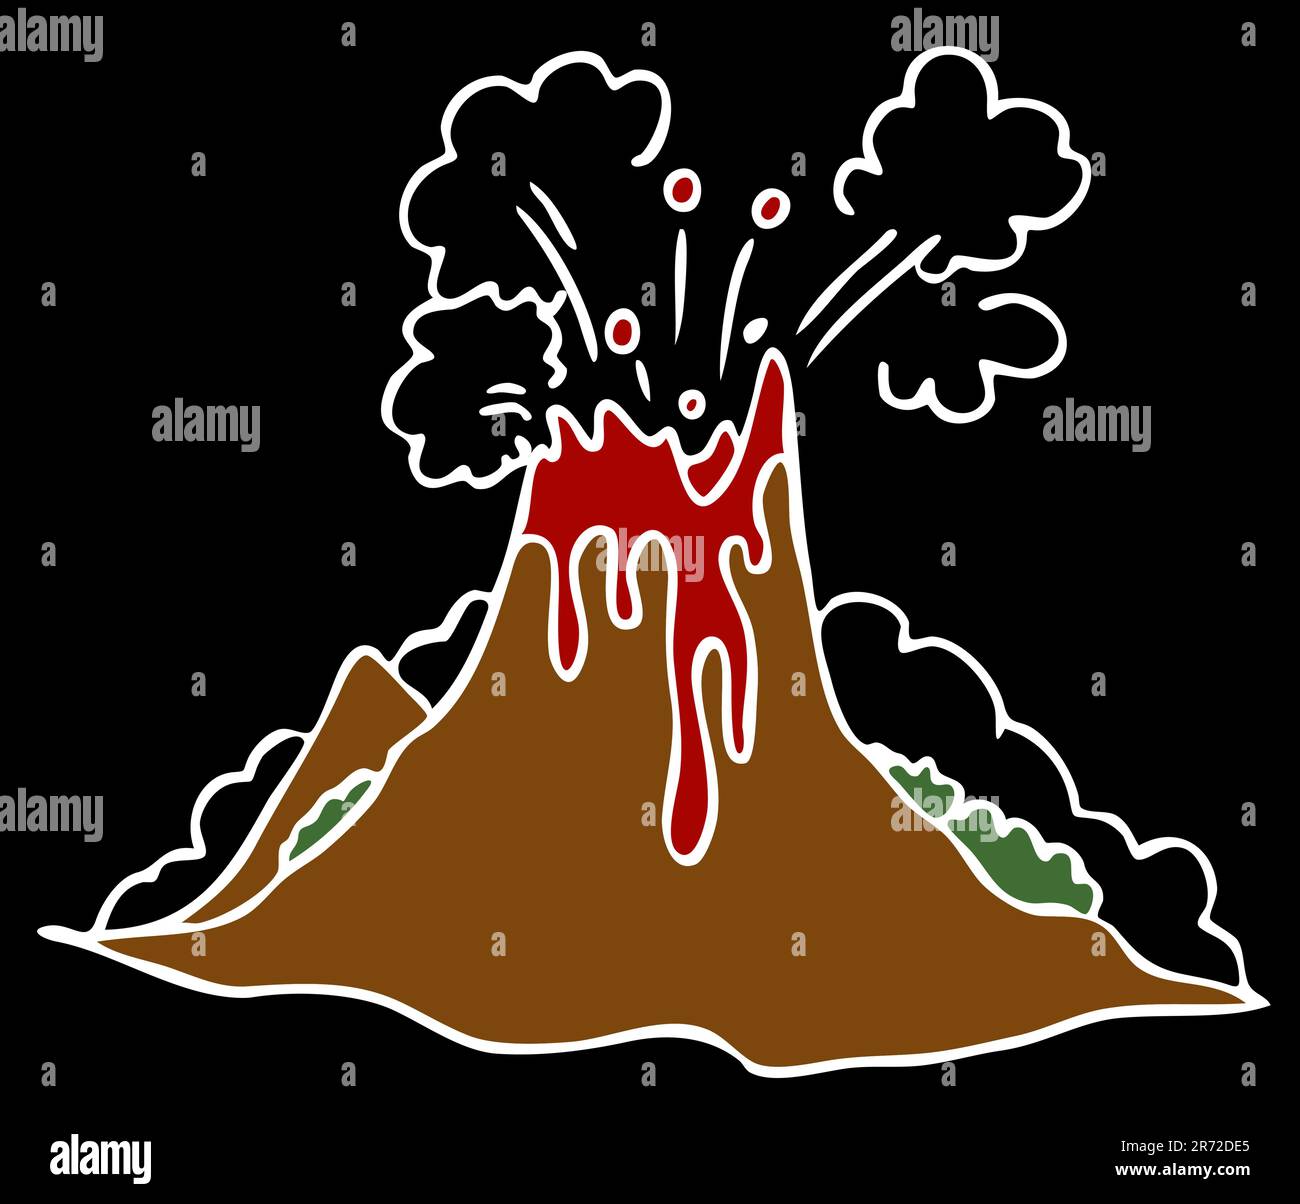 An image of a exploding volcano on a black background. Stock Vector